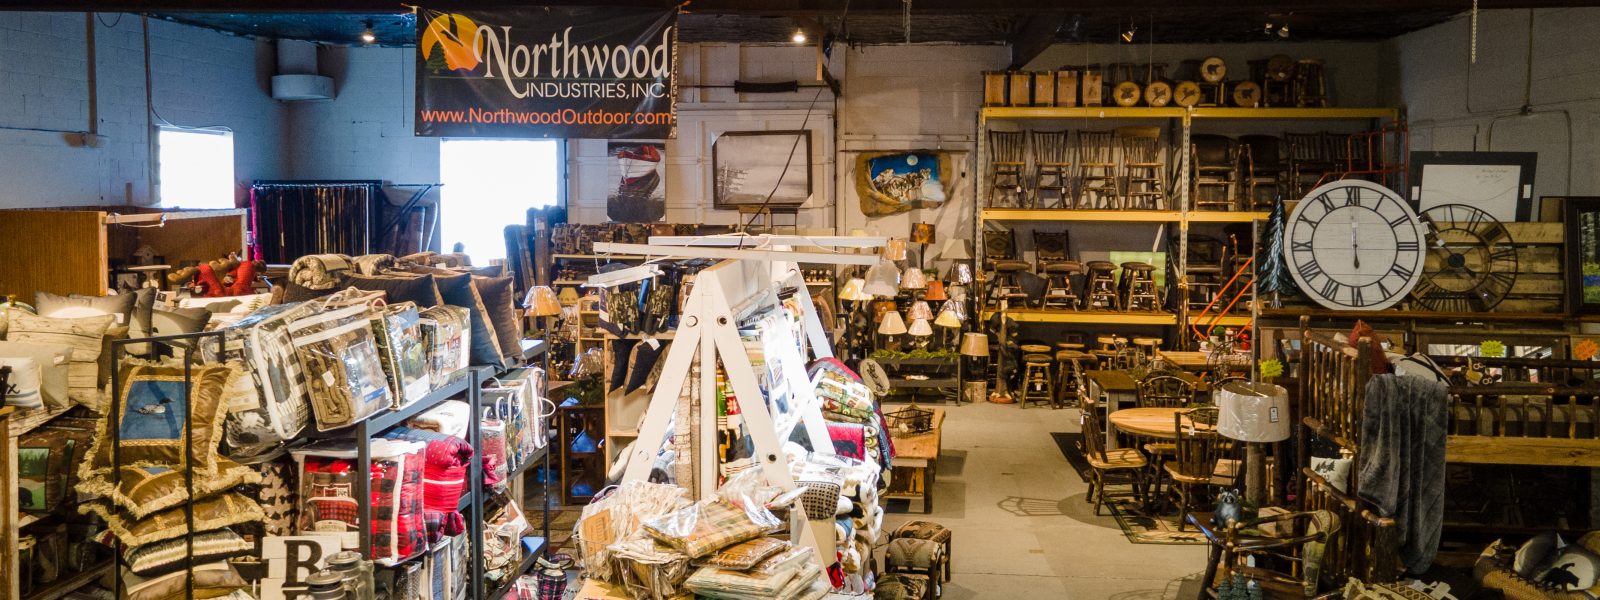 Rustic Cabin Decor, Furniture And More, Northwood Outdoor